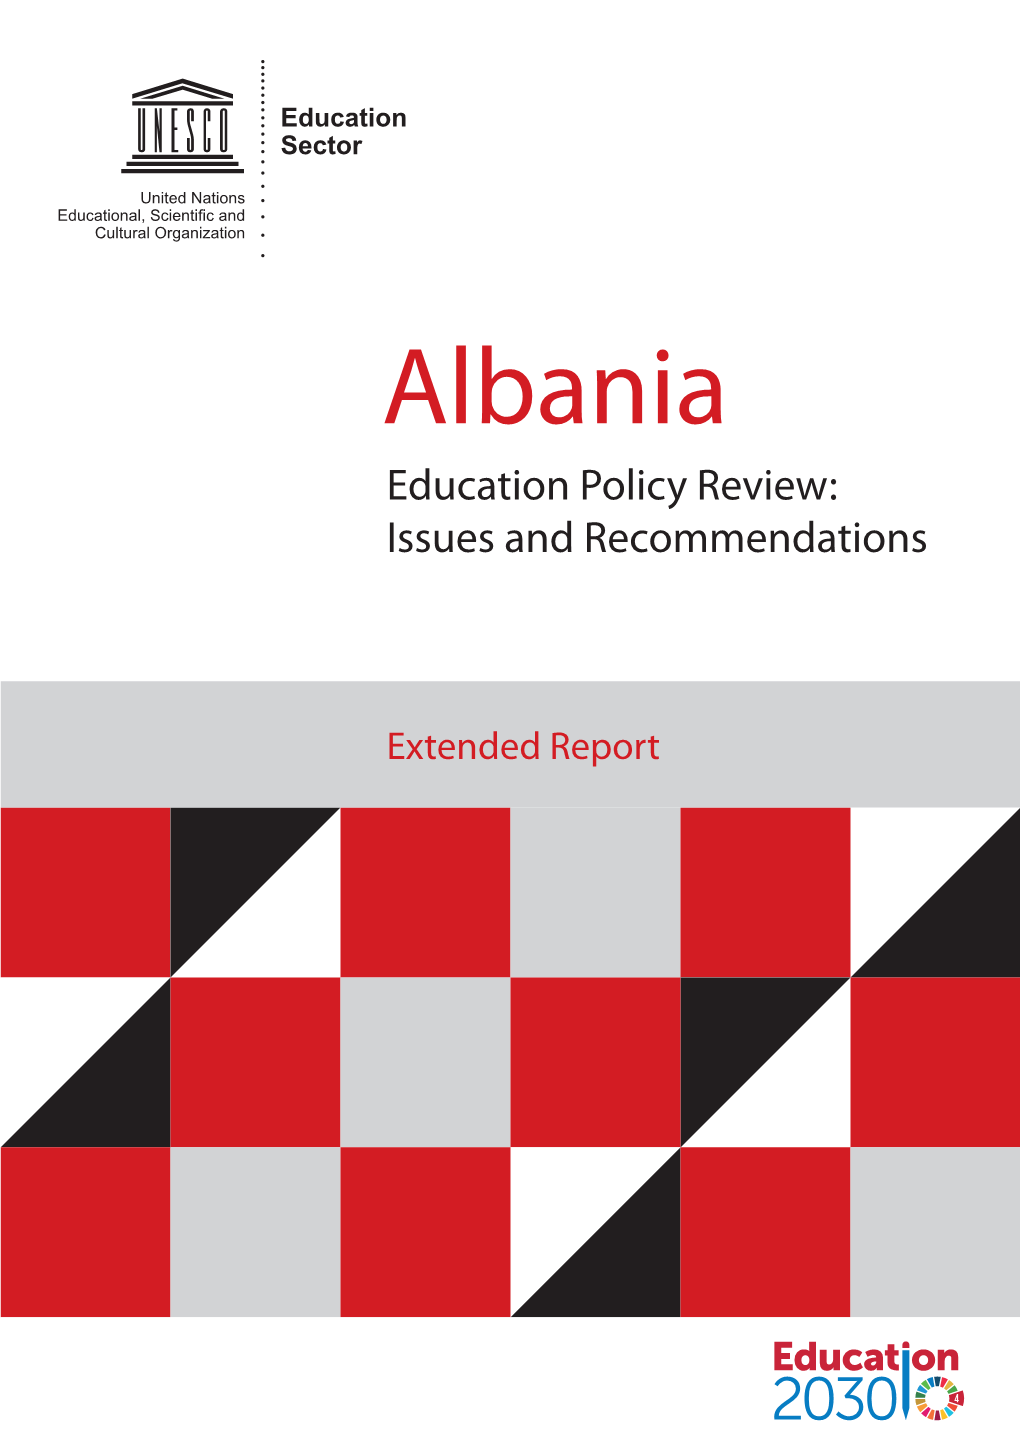 Albania: Education Policy Review